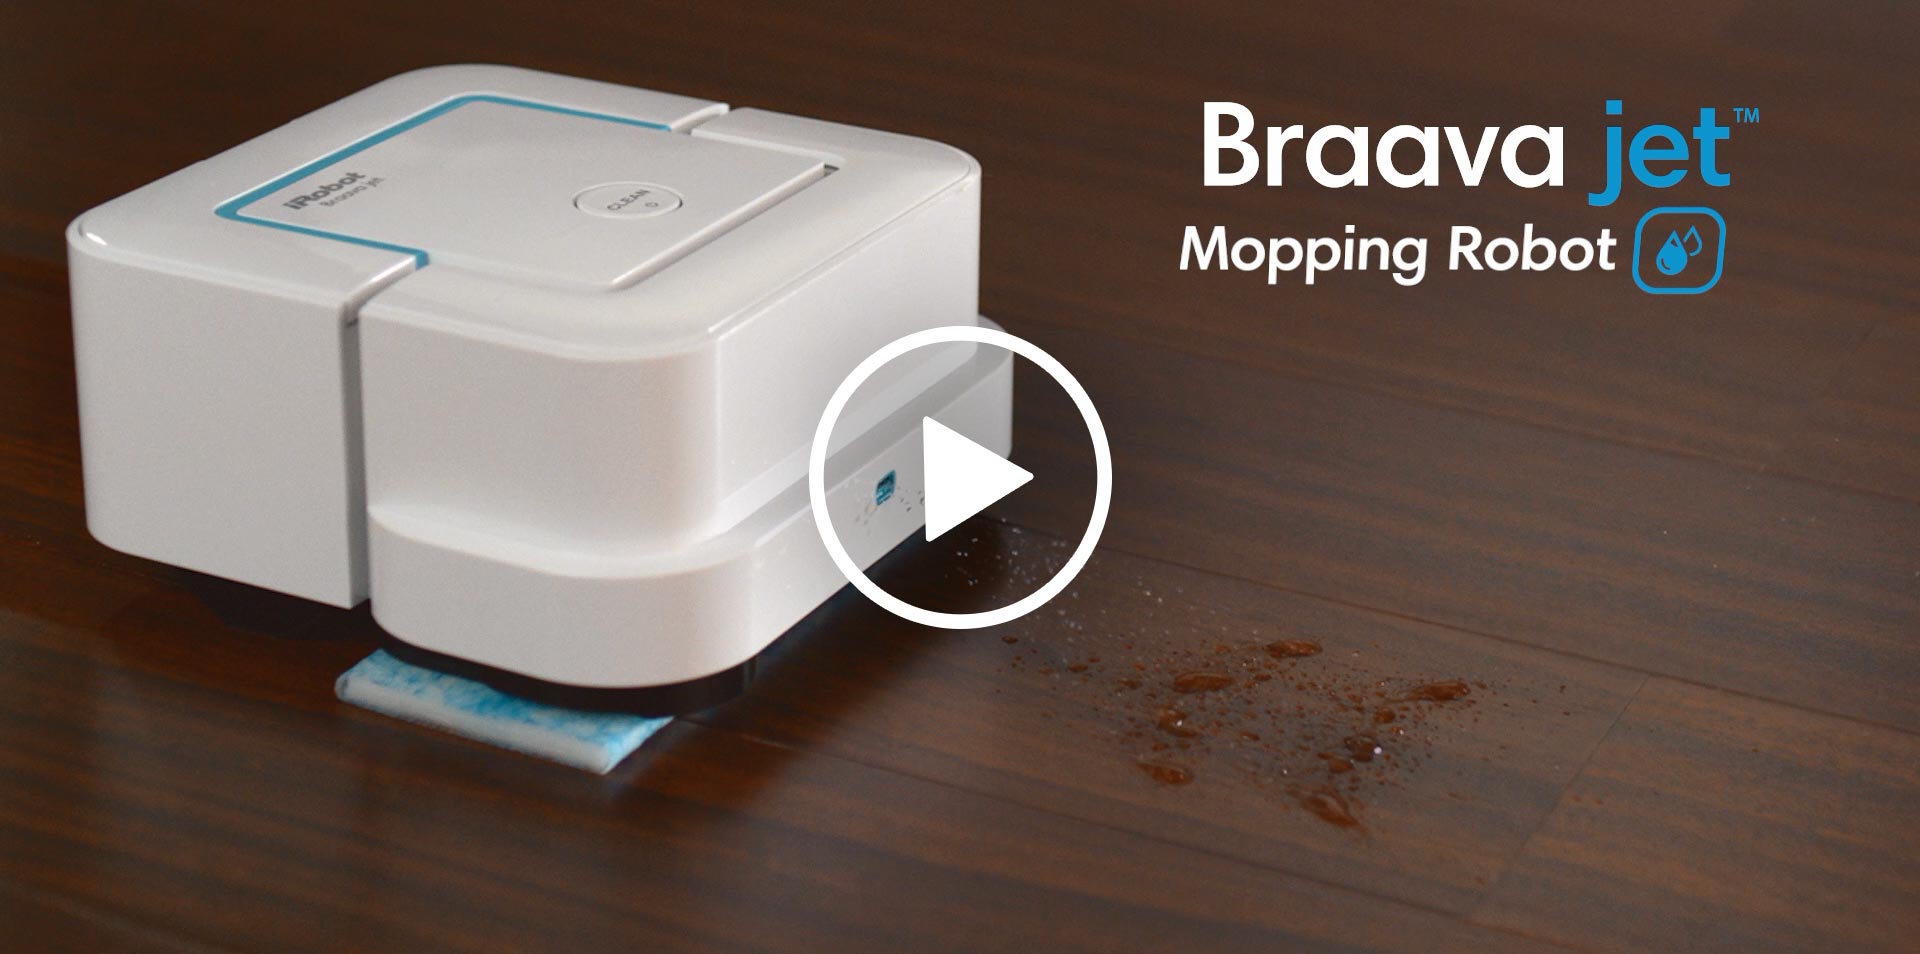 IRobot Grows Consumer Product Lineup With Braava Jet Mopping Robot